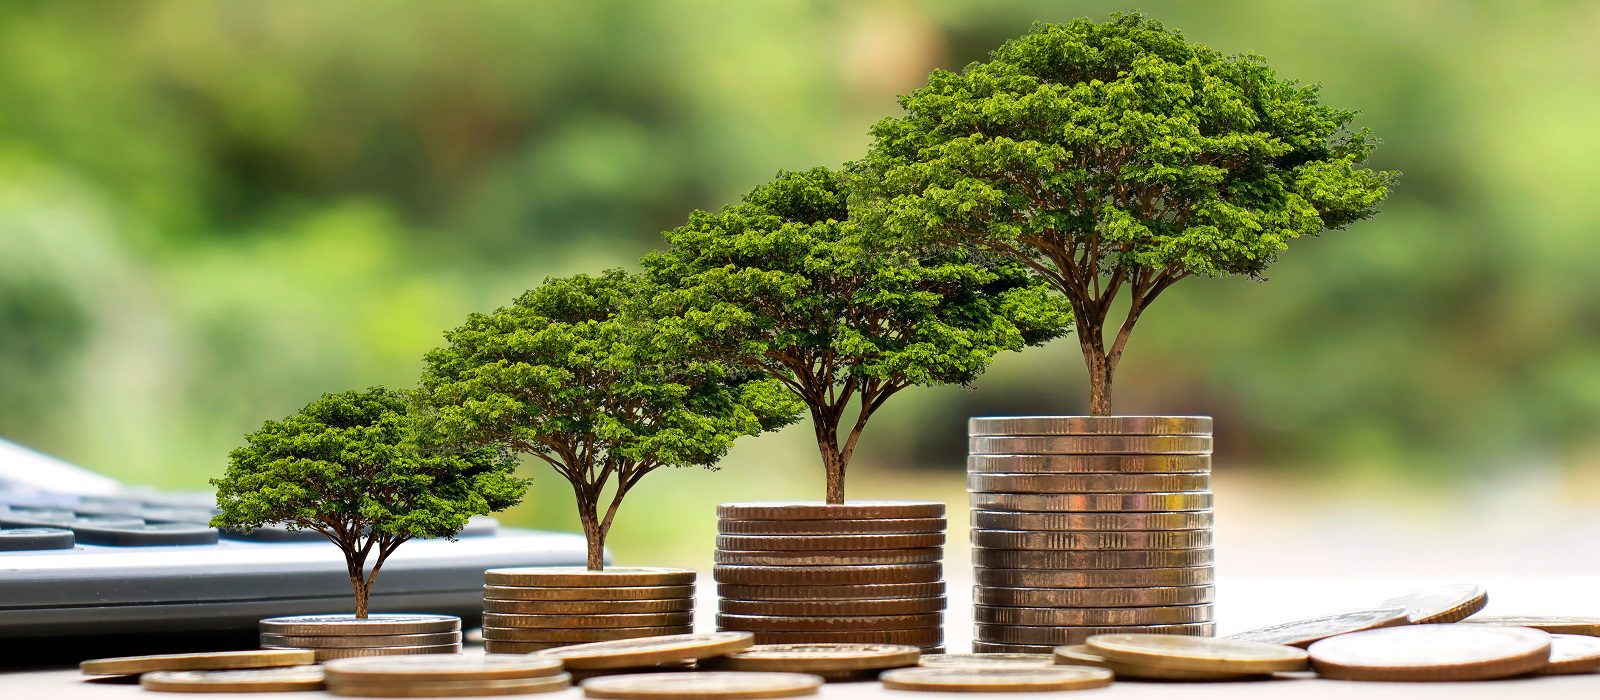 Plant a tree on a coin stack, including a calculator and jar for money. Financial accounting concepts and save money.